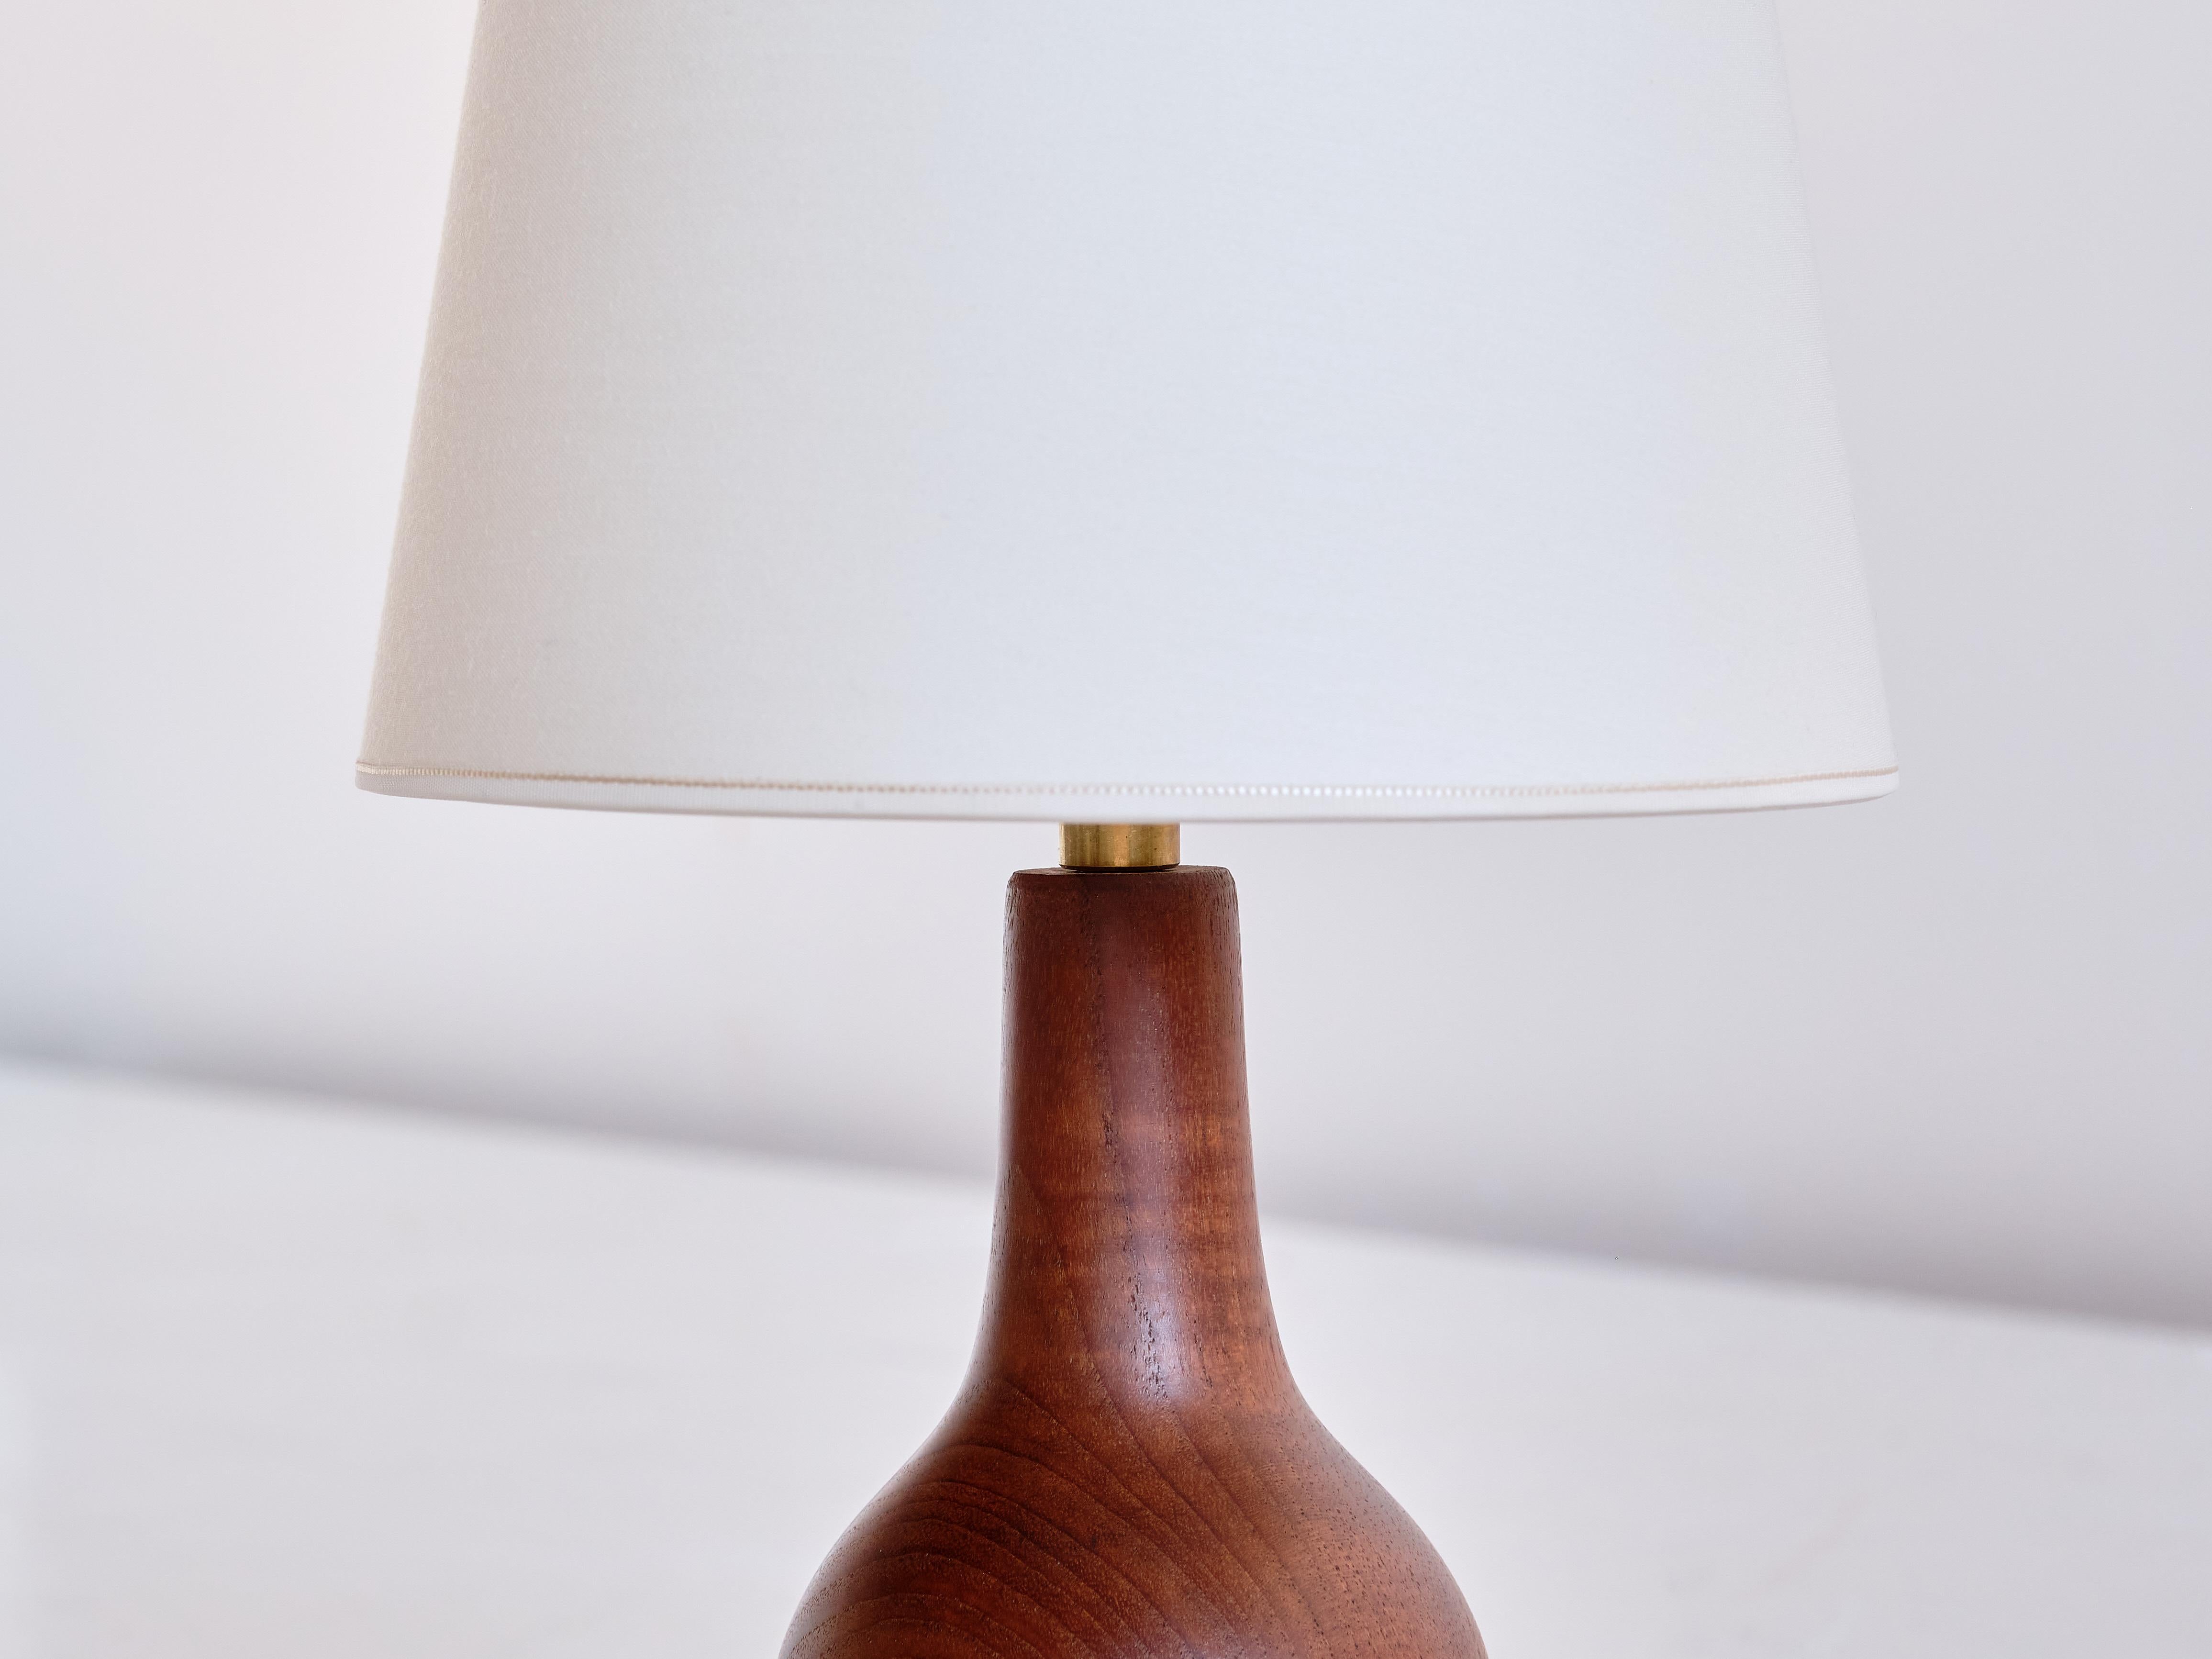 Mid-20th Century Sculptural Table Lamp in Teak Wood and Ivory Drum Shade, Denmark, 1960s For Sale